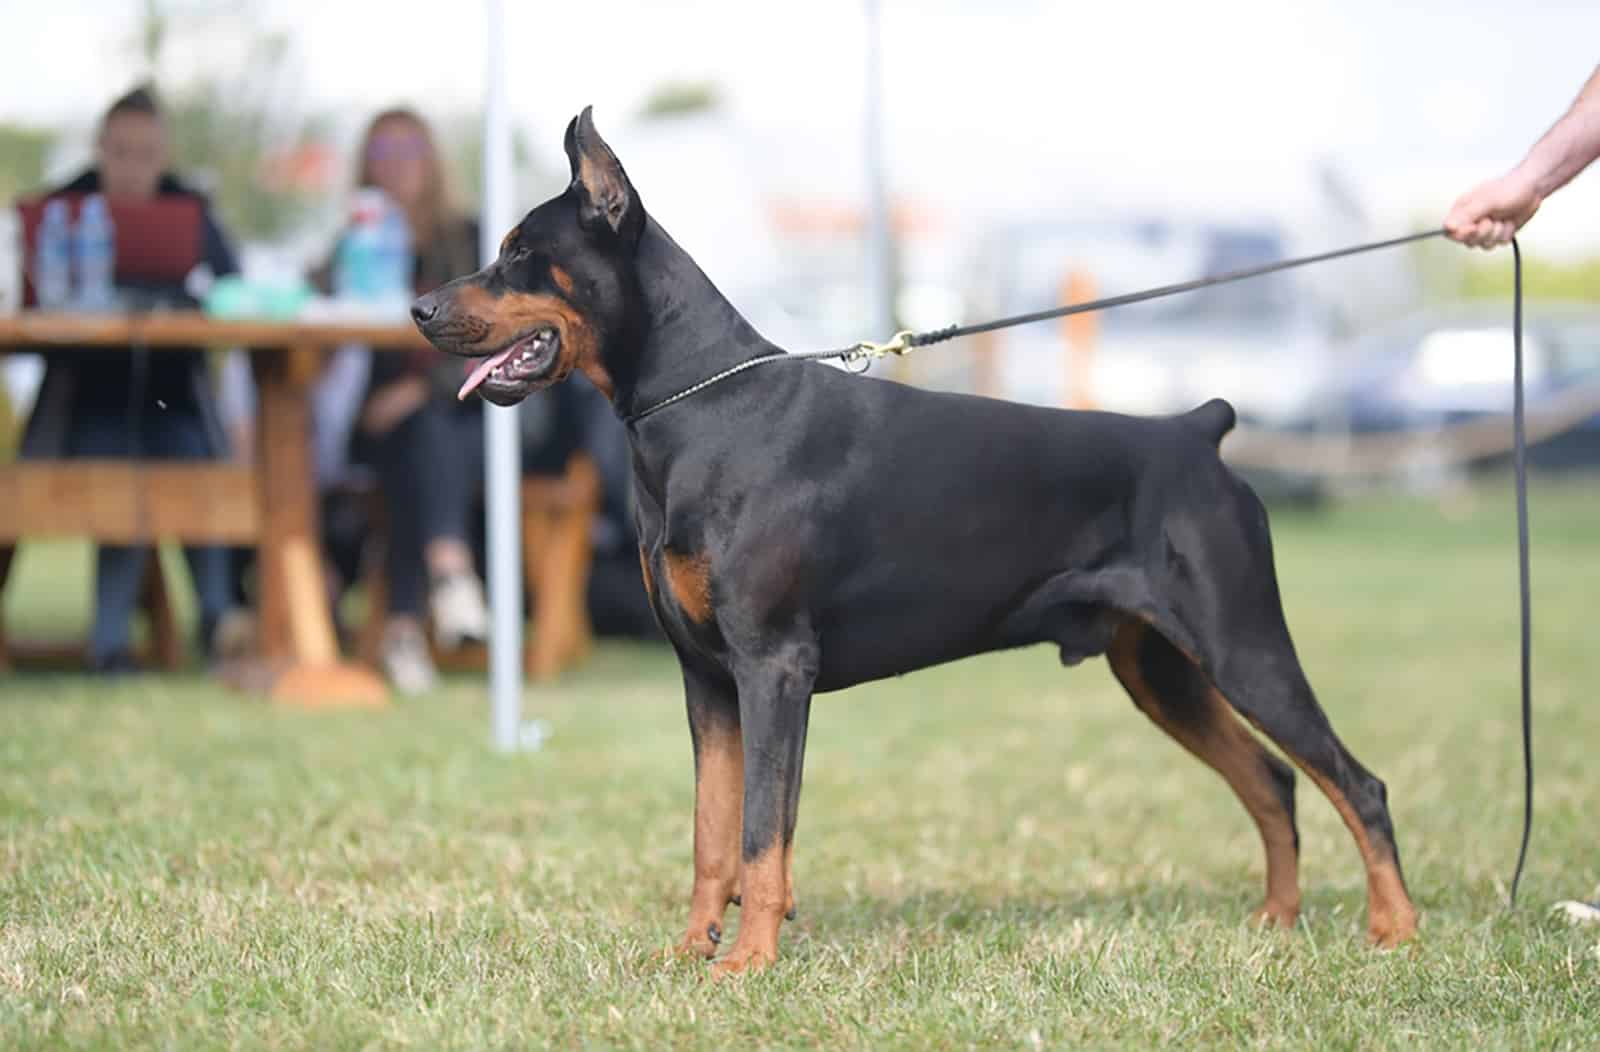 doberman dog with docked tail on a leash